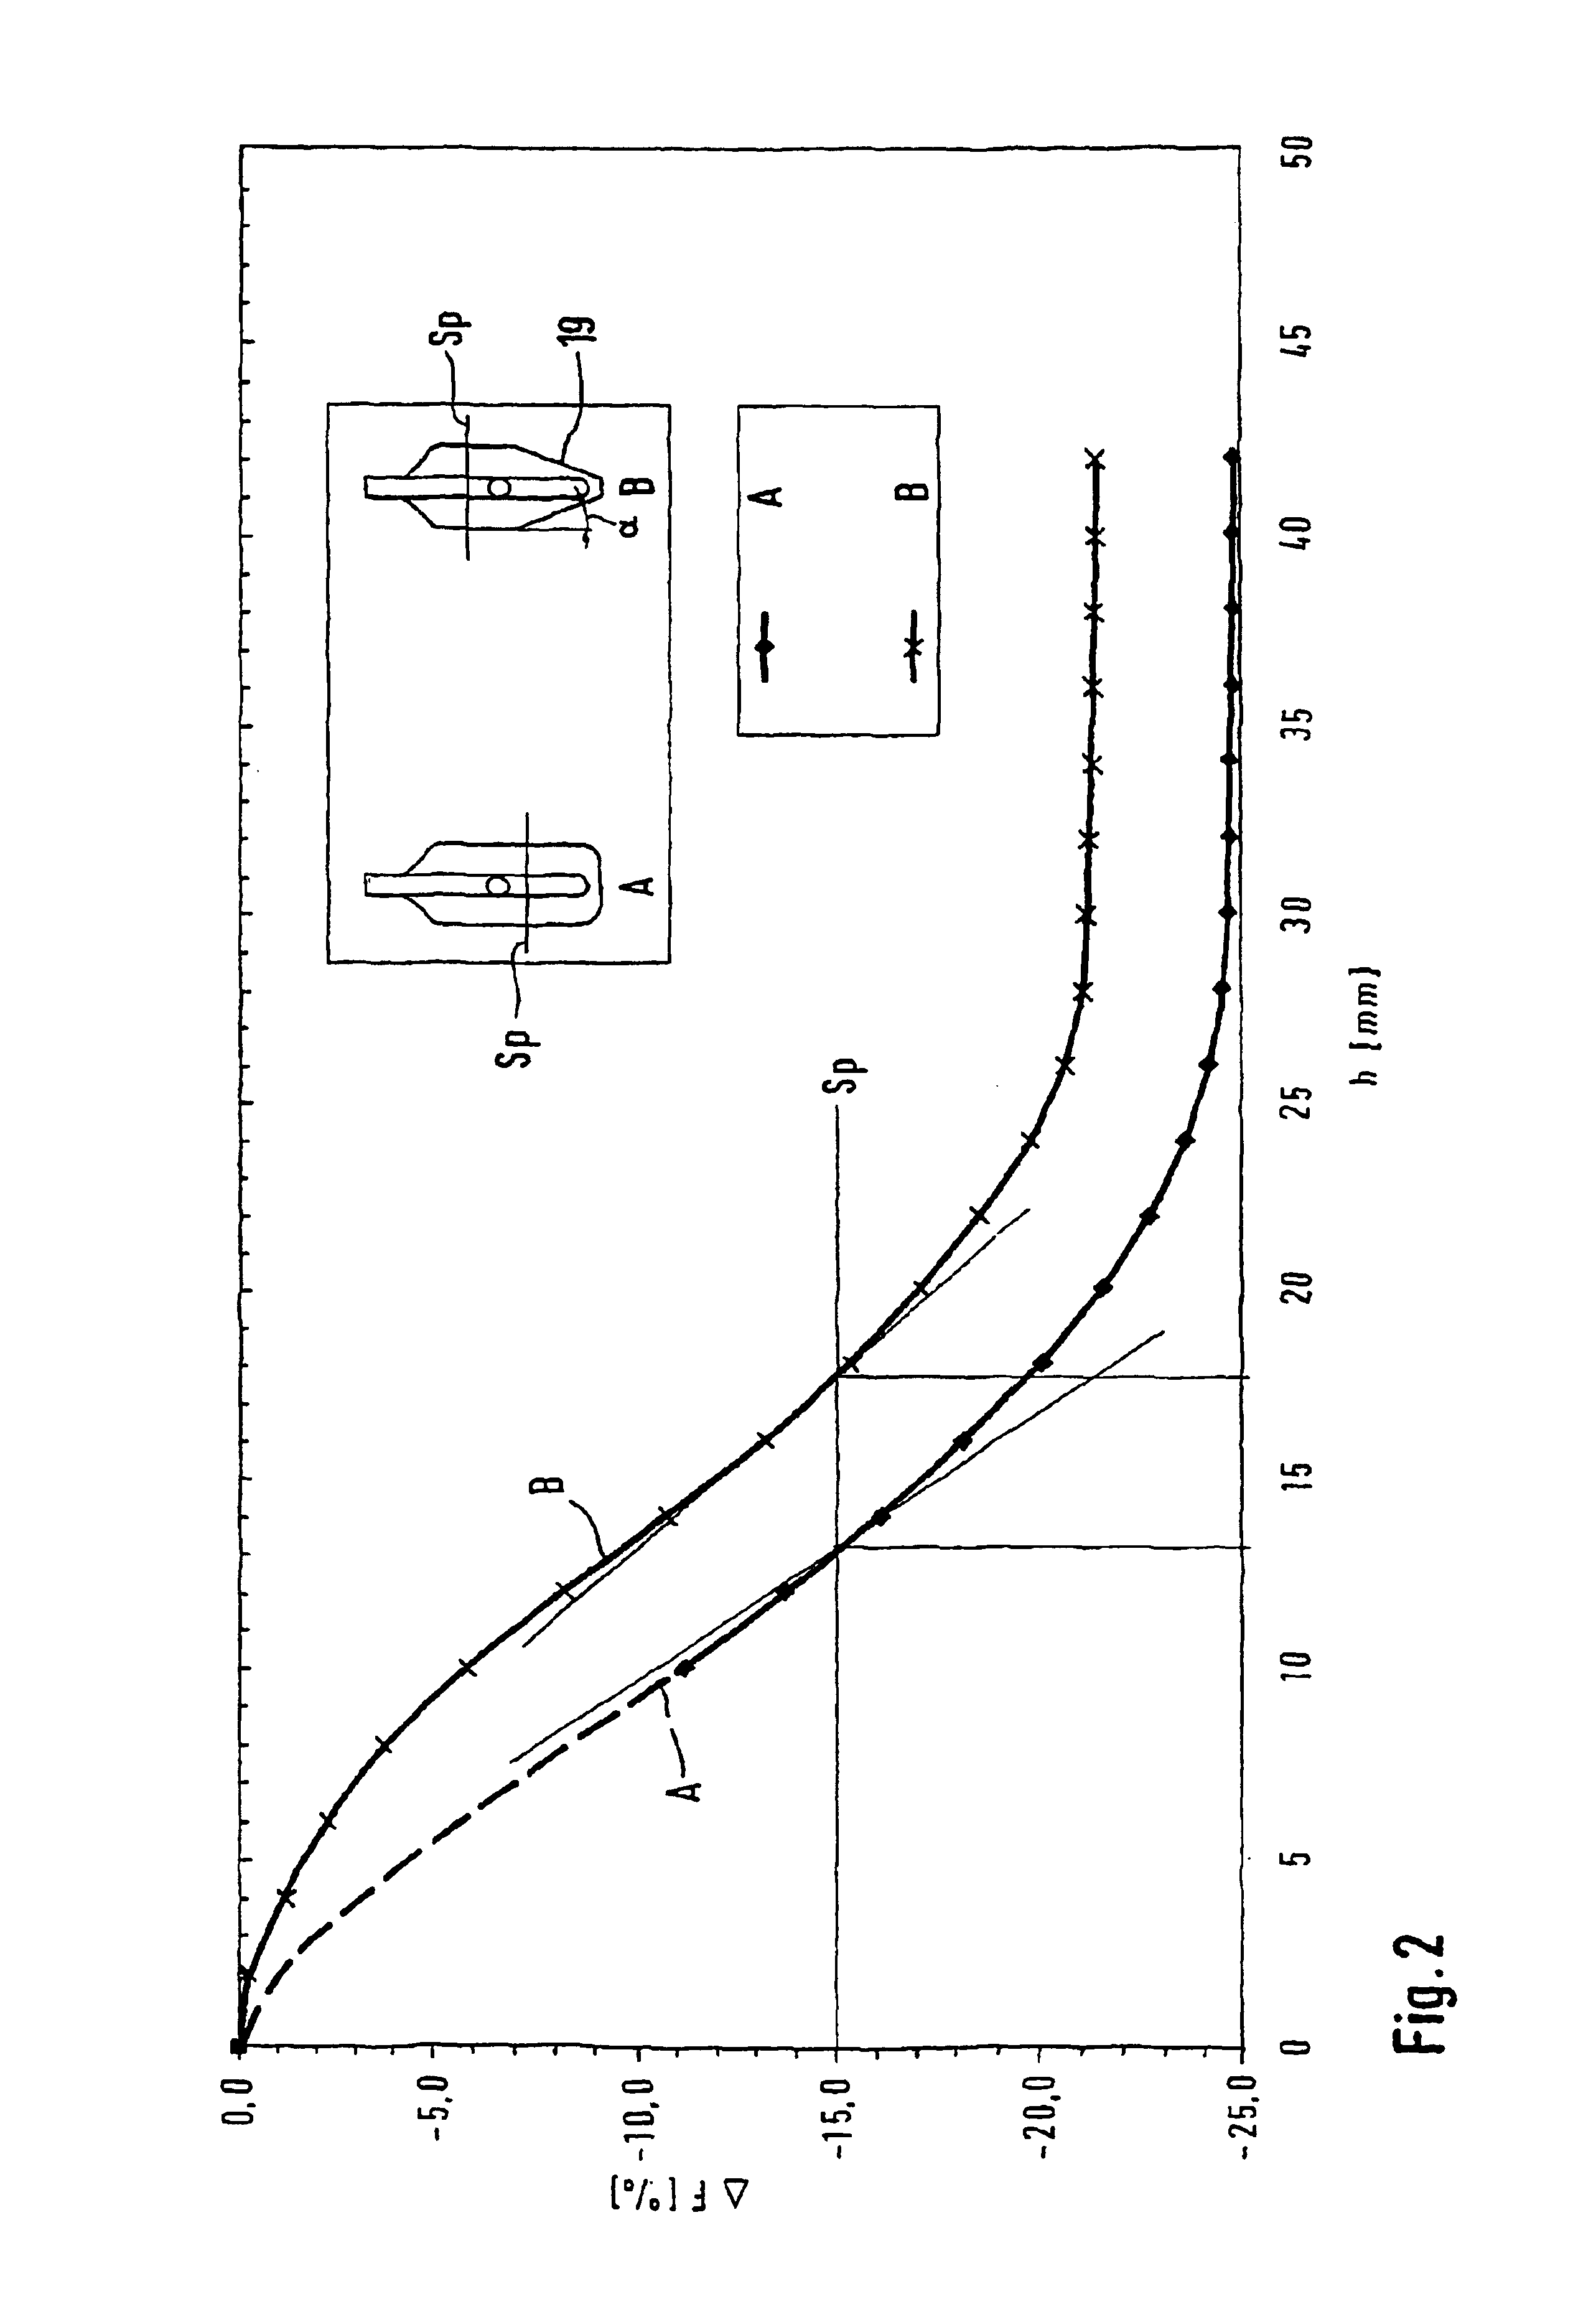 Device for establishing and/or monitoring a predetermined fill level in a container